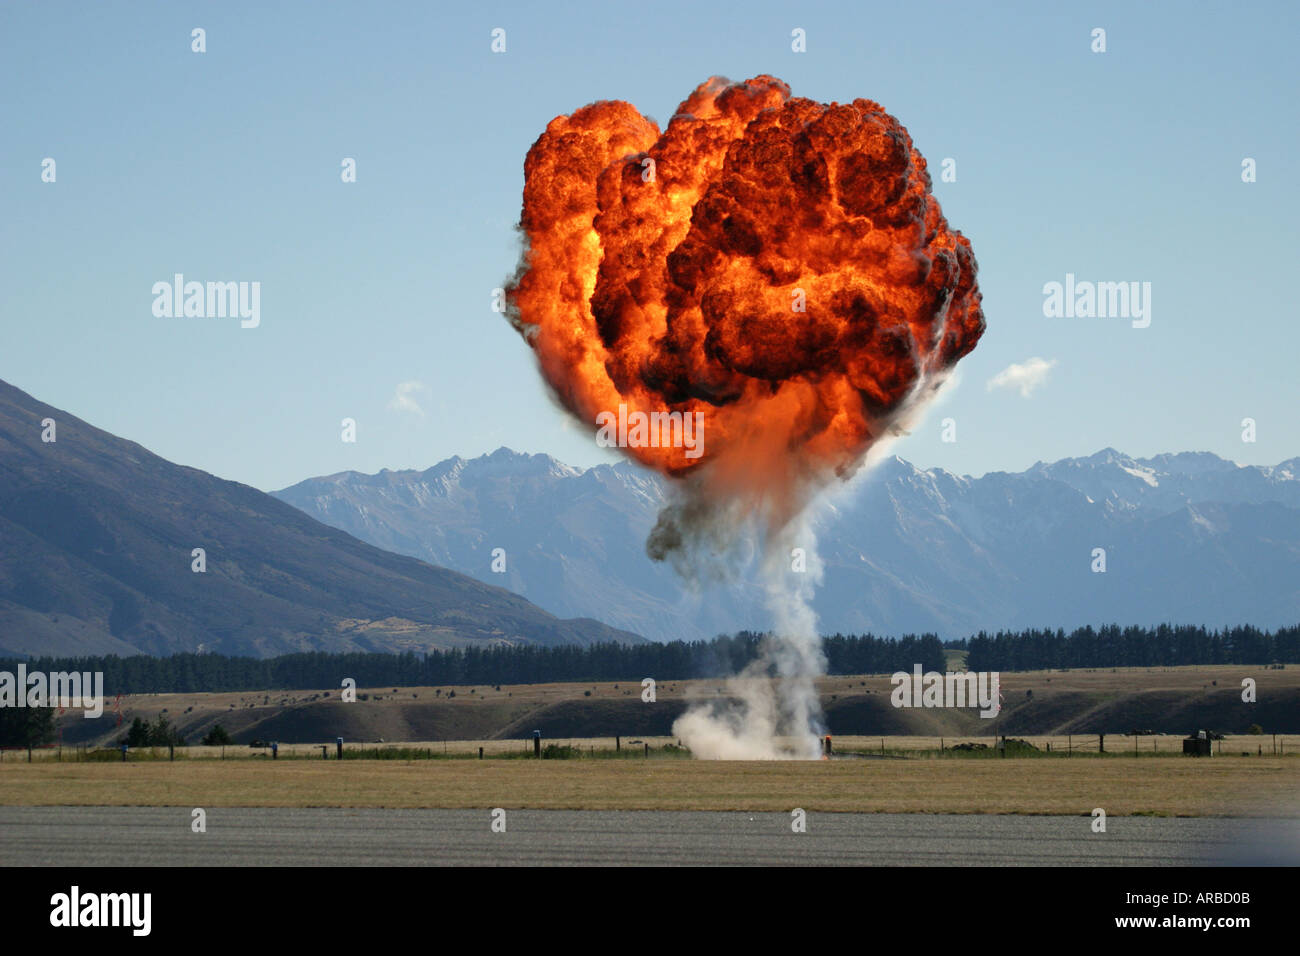 Controlled Explosion at Air Show Re enactment Stock Photo